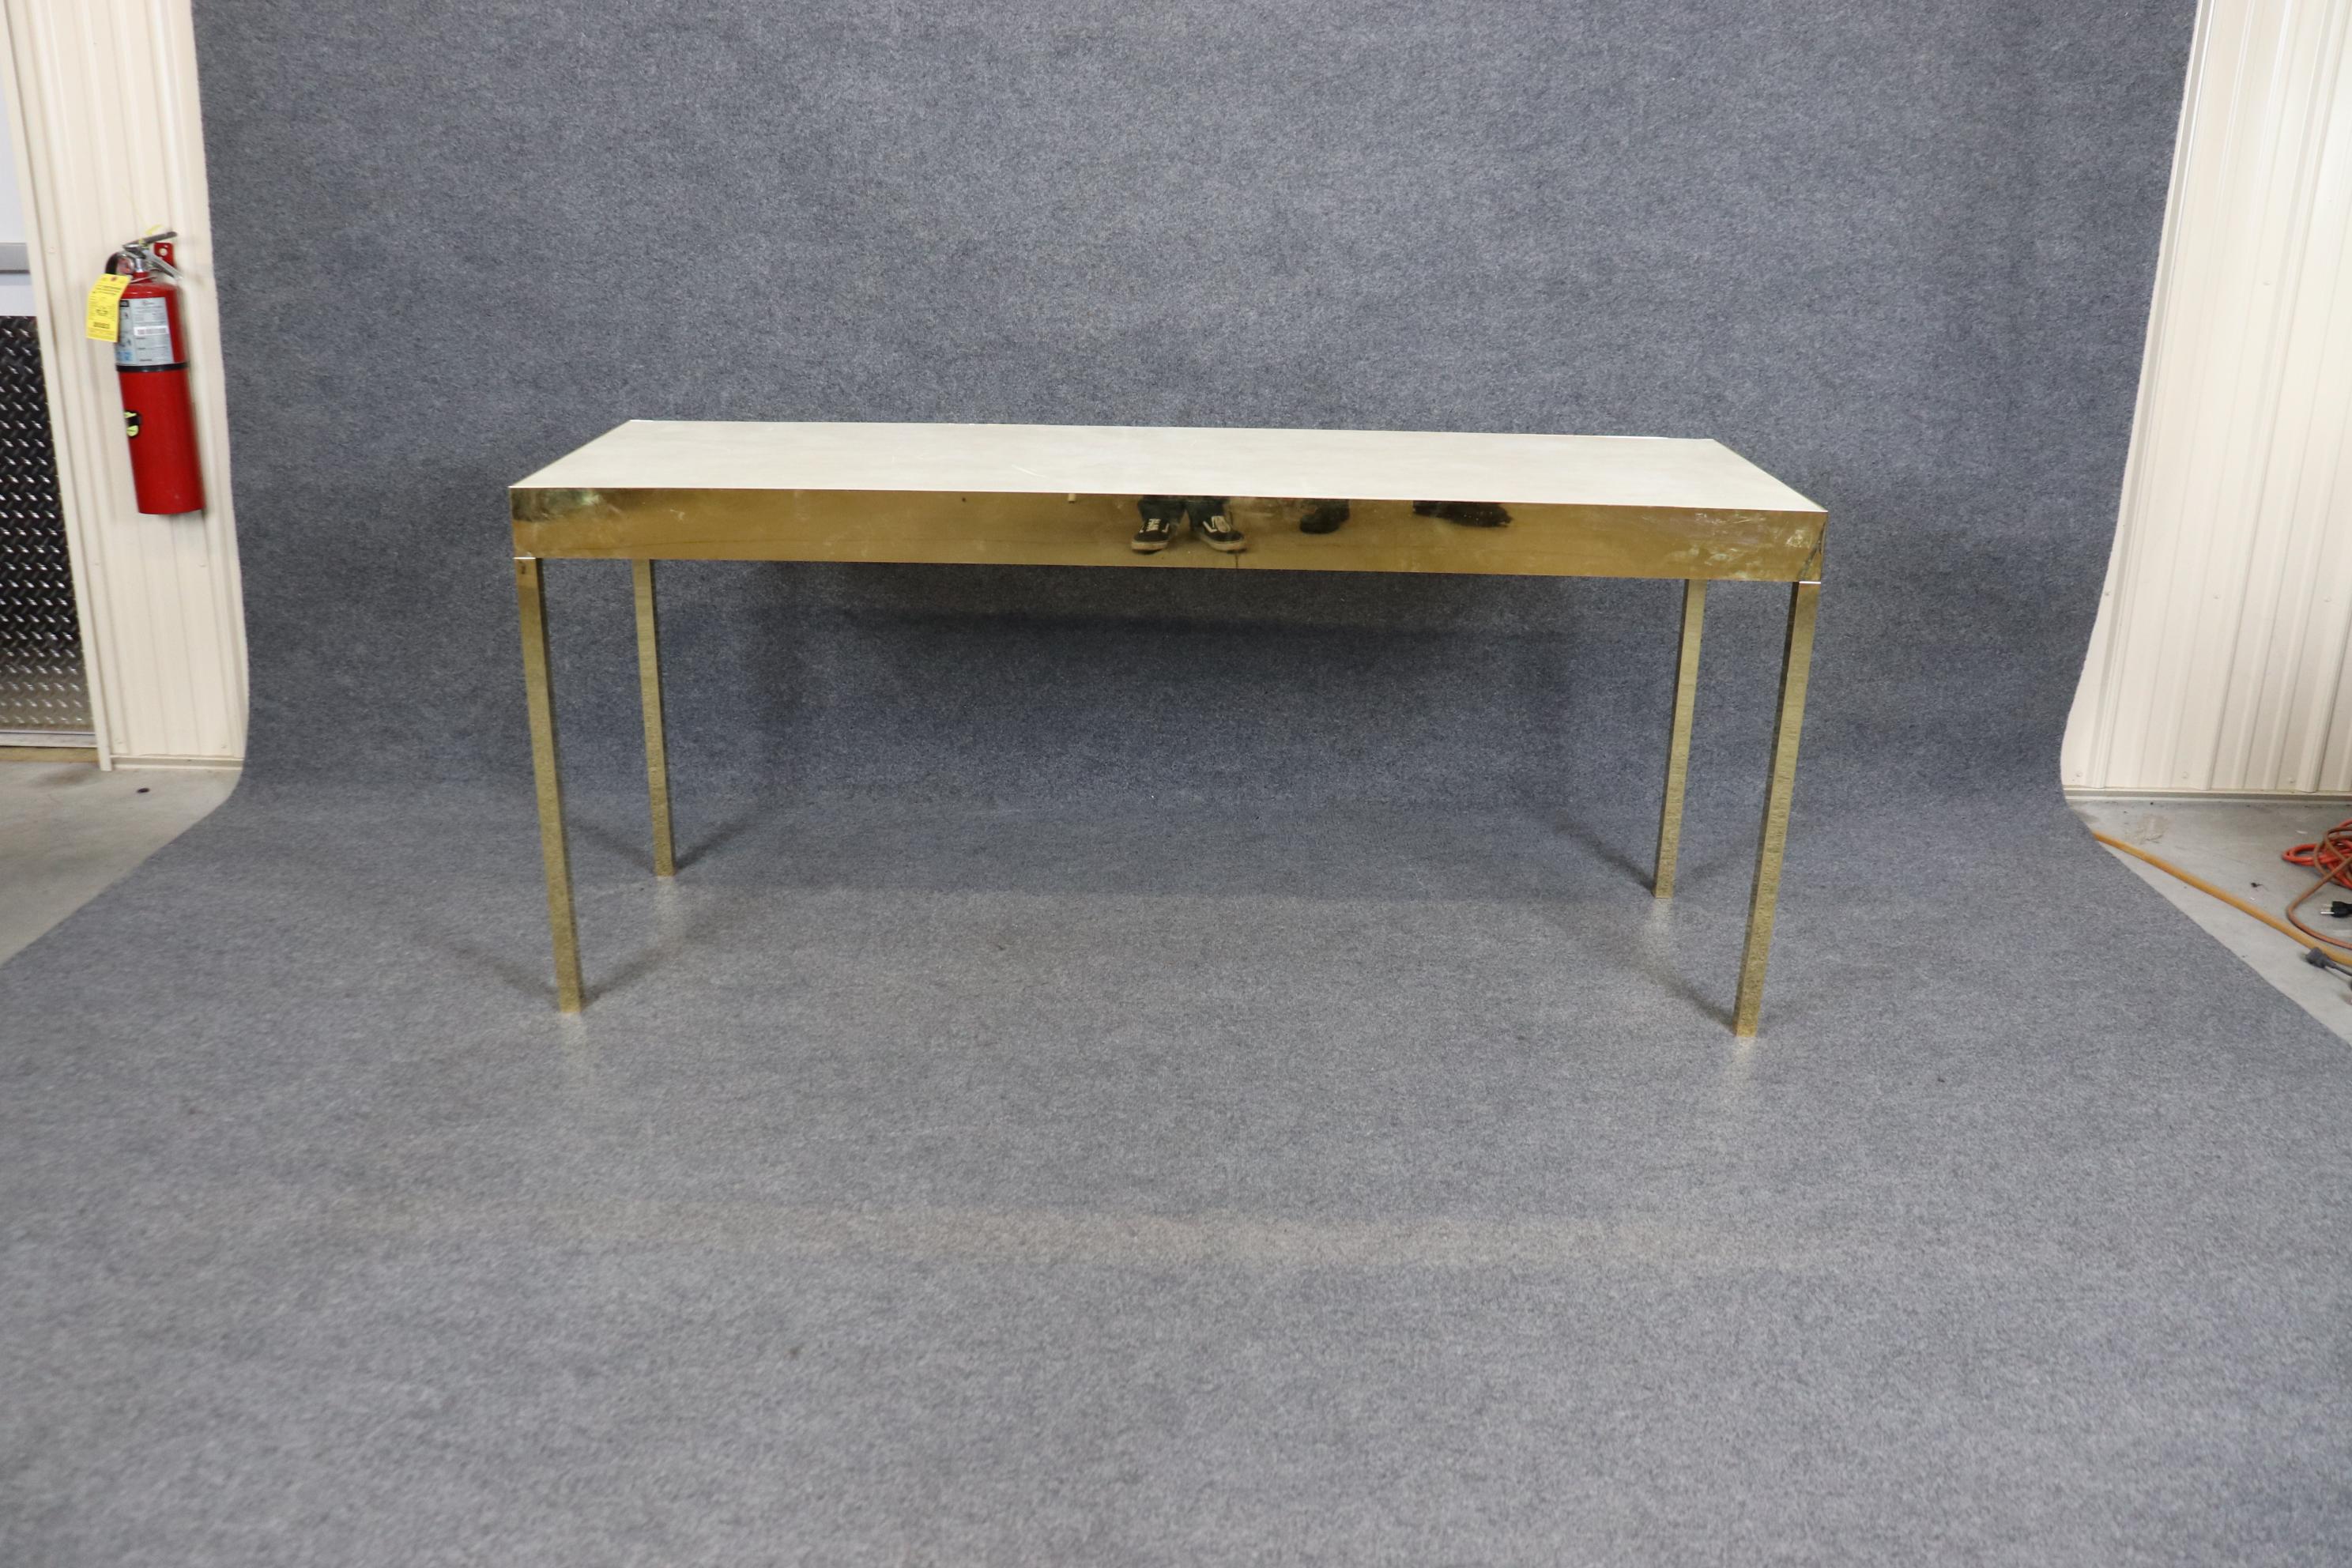 This table is a very sleek and modern style table similar to Milo Baughman in style. The table is in good condition with brass flashed metal and a leather top with age appropriate surface wear and signs of use.  Measures 71 wide x 23.75 deep x 31.5